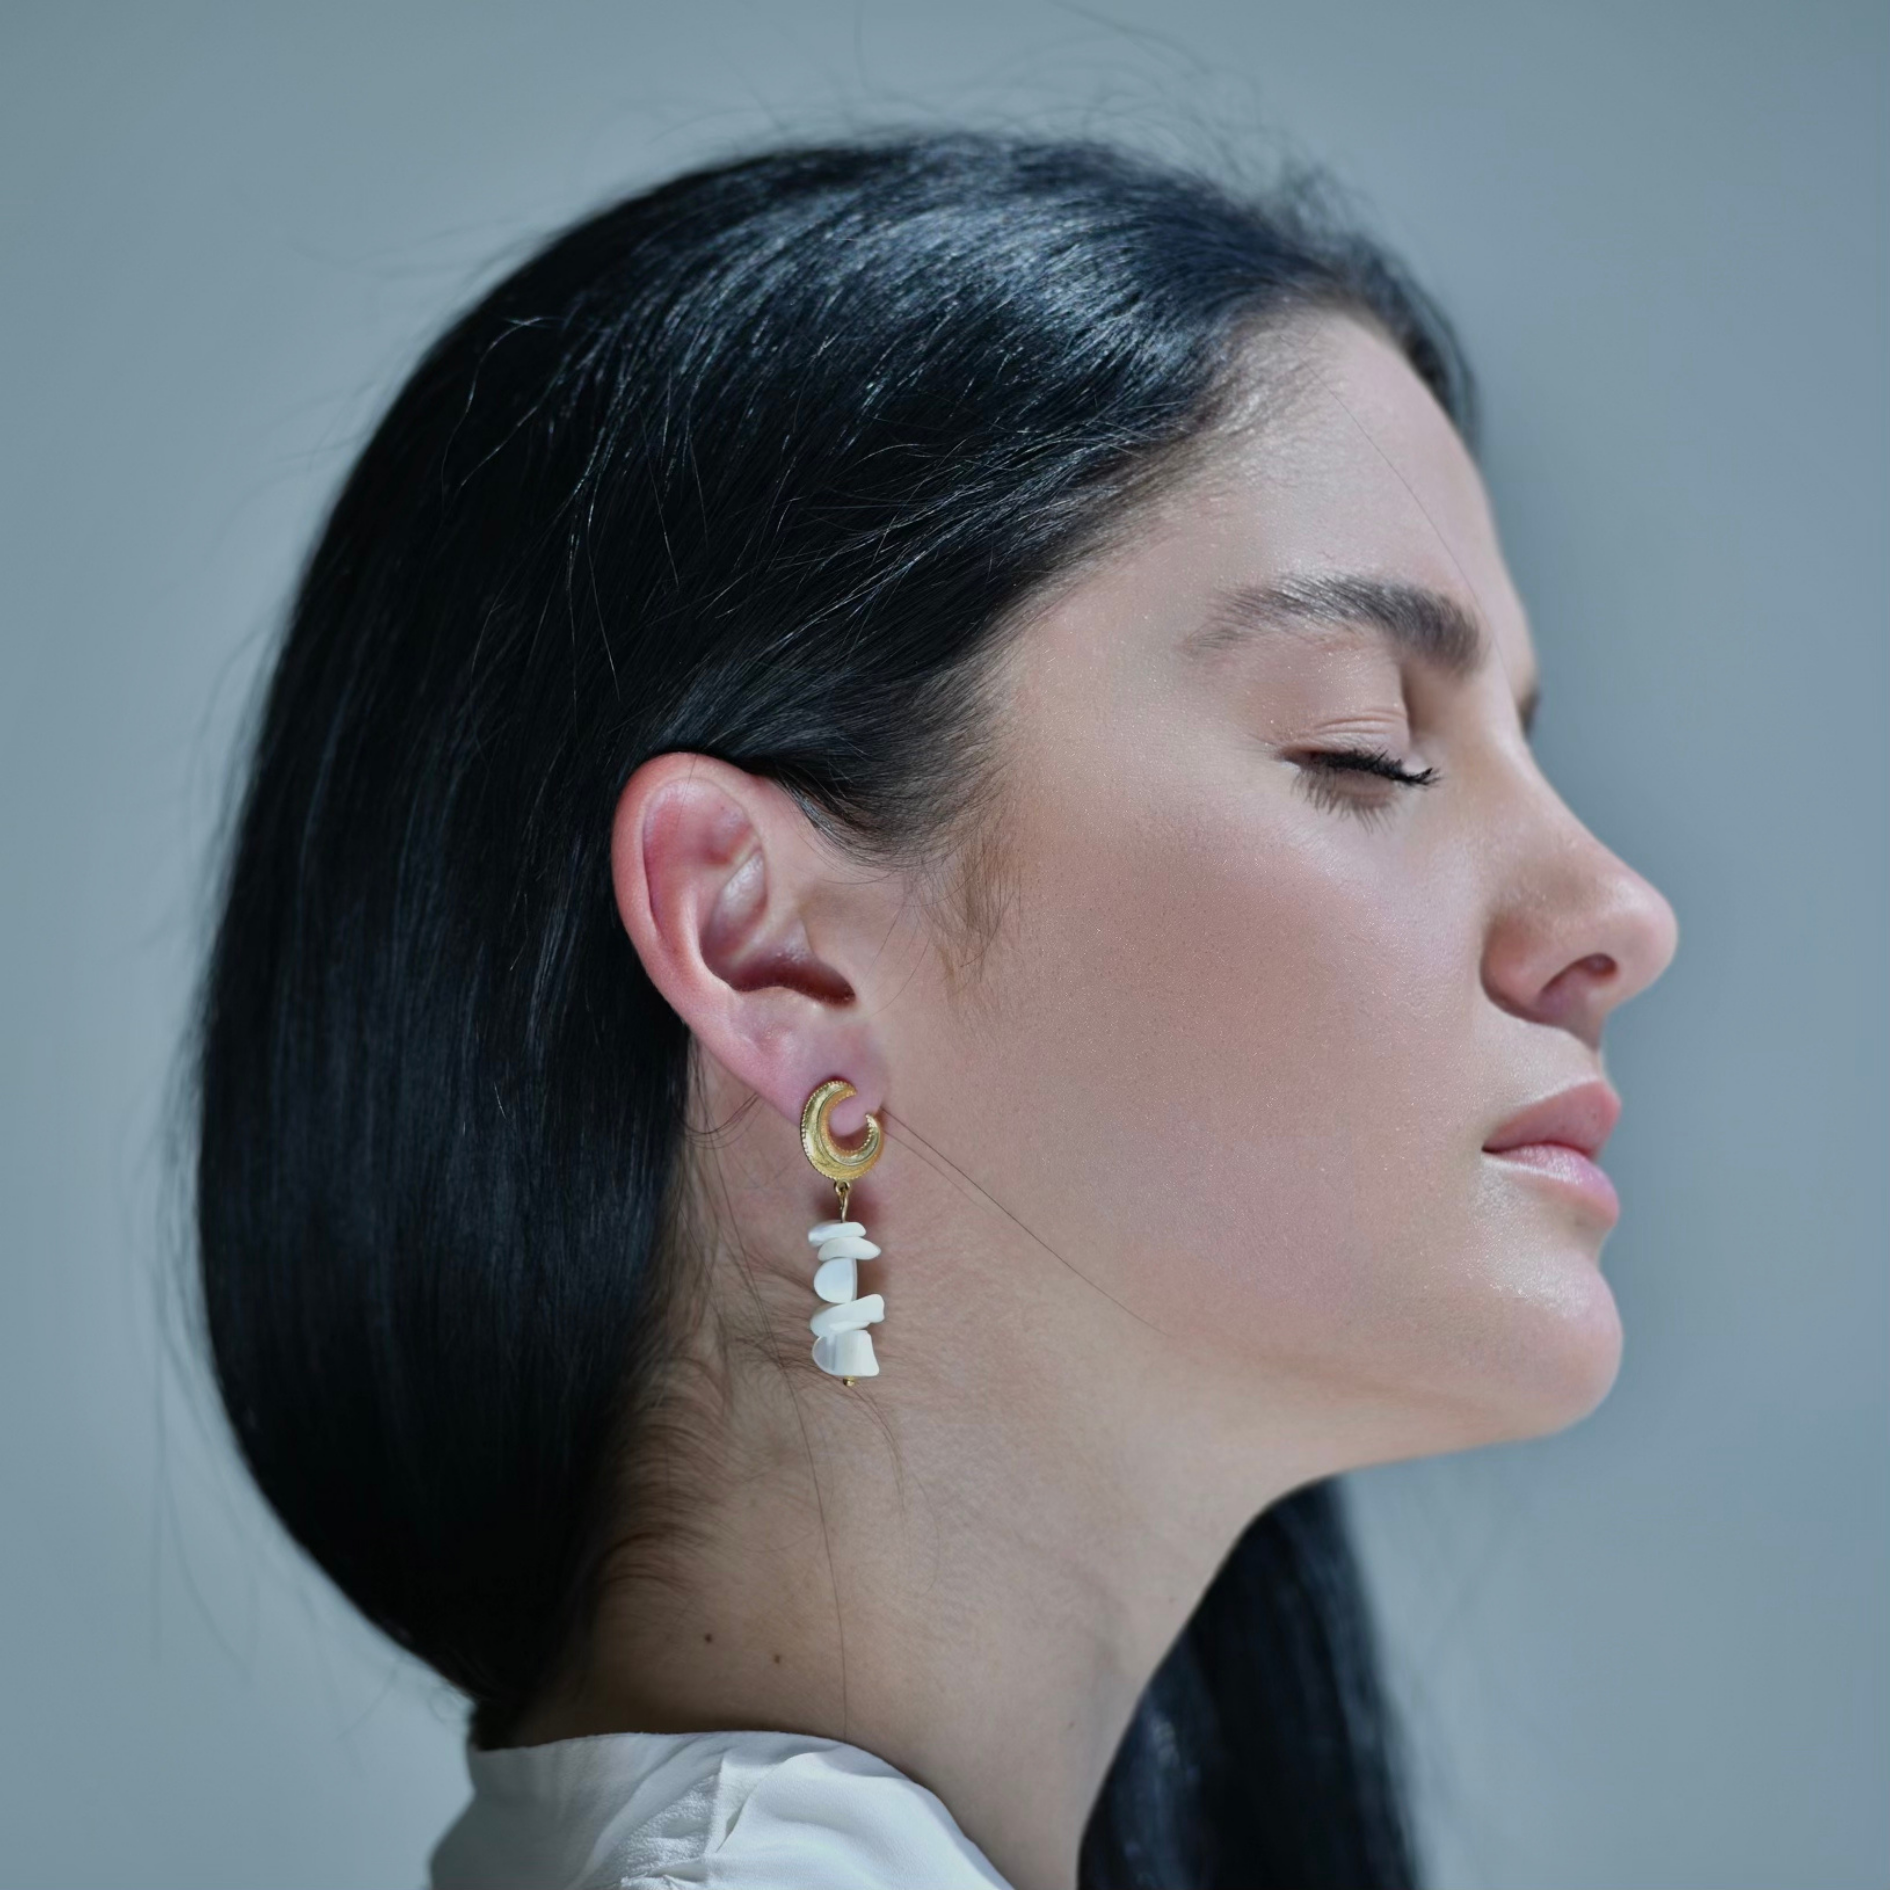 LUNAR Irregular white pieces attached one with another forming a drop earring. At the top is a gold half draped moon shaped gold piece.